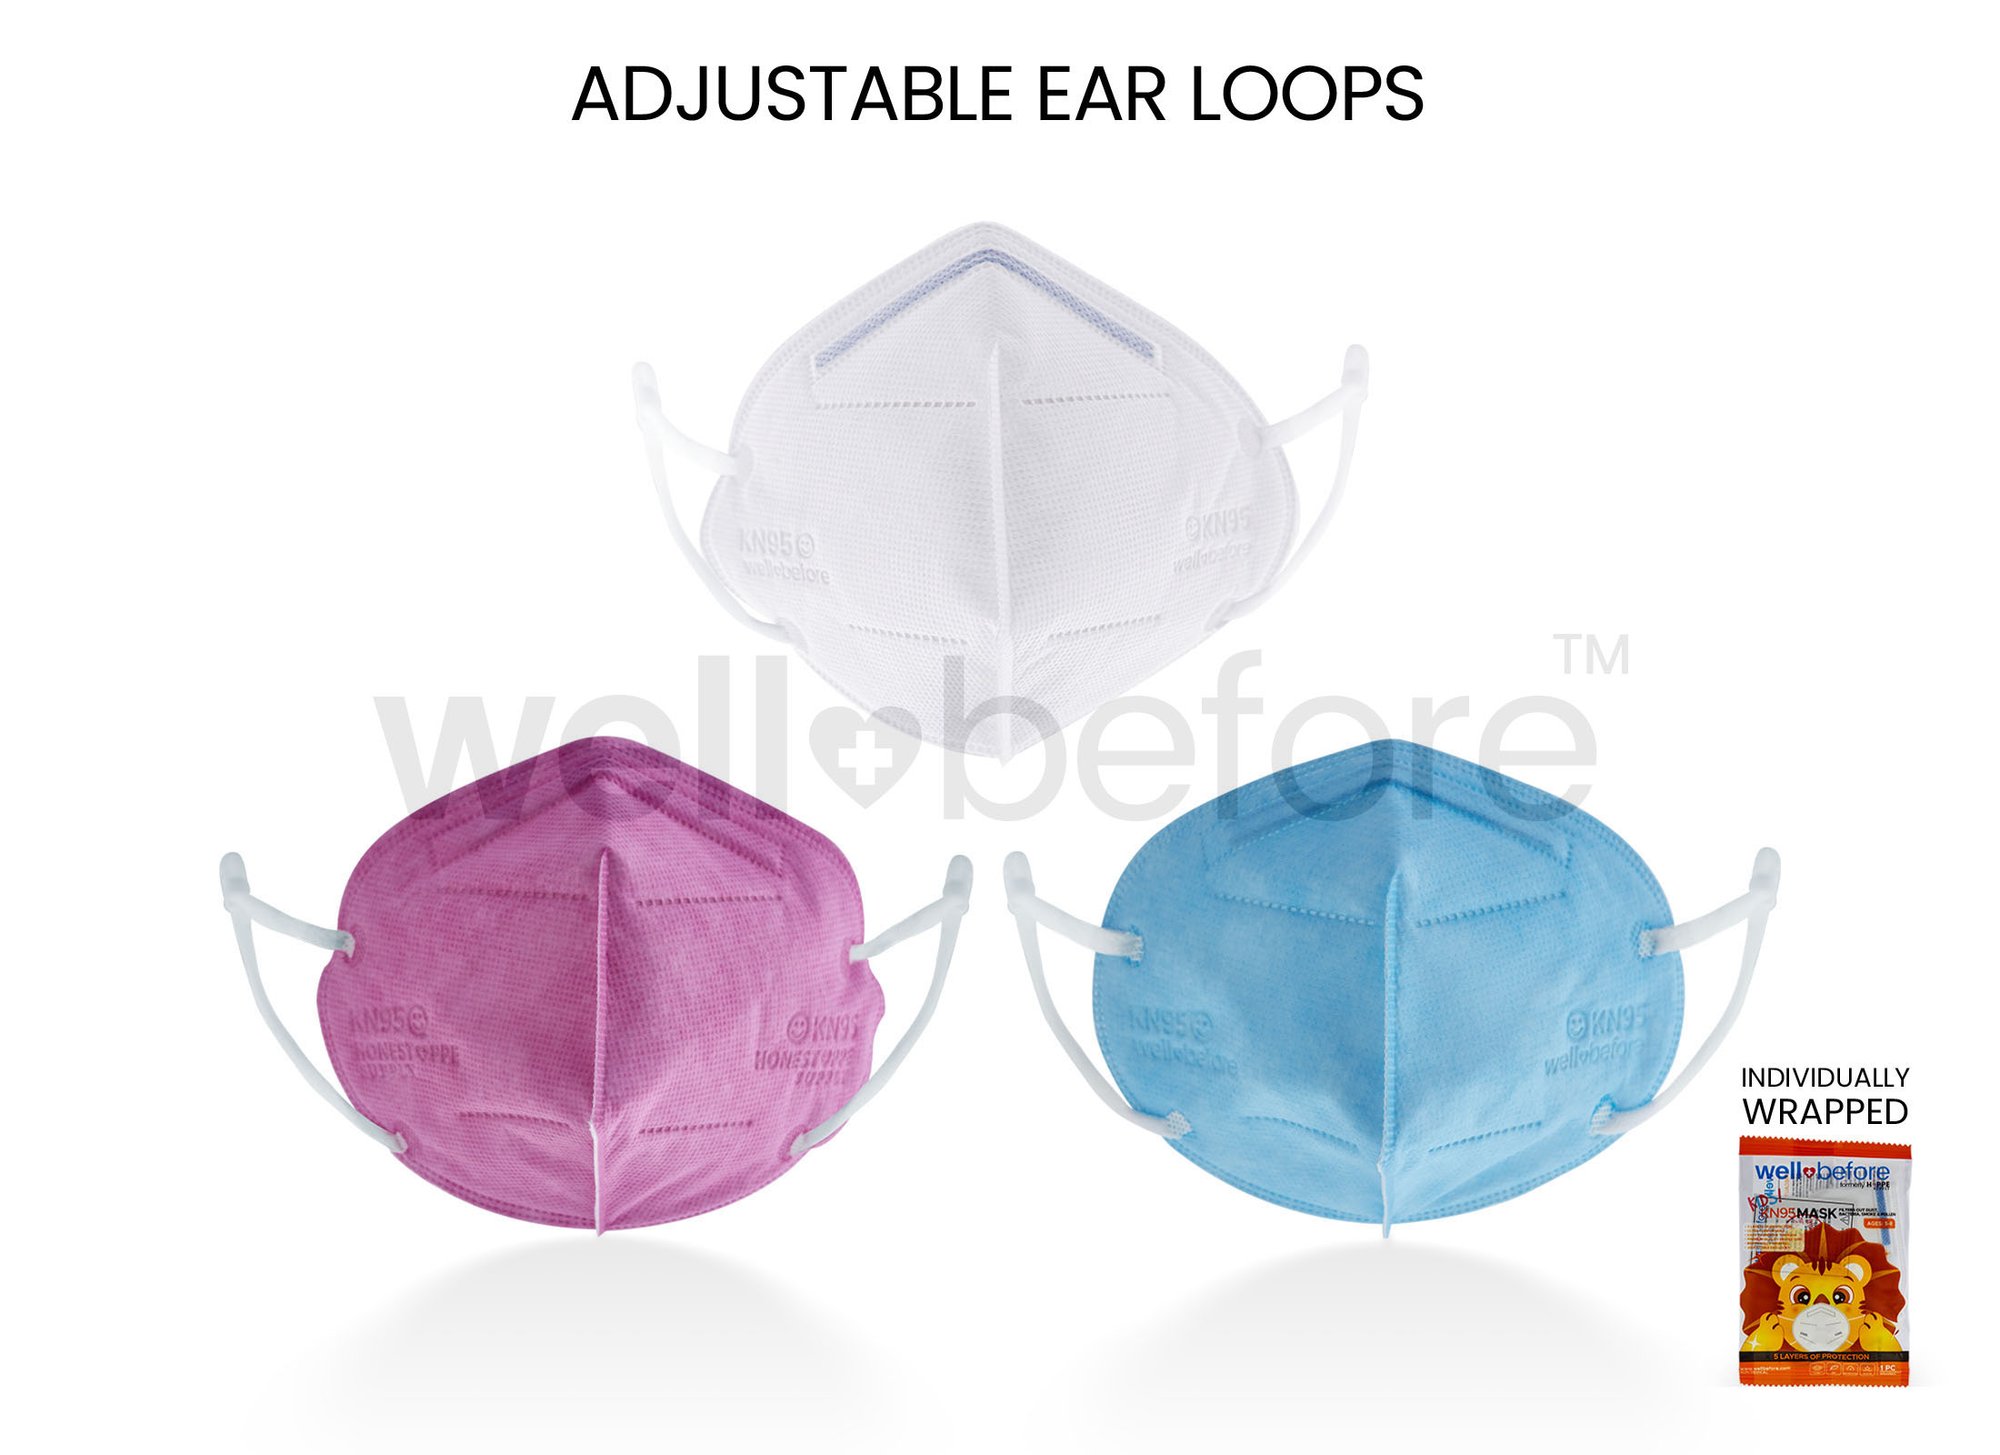 Kids KN95 - Adjustable - Individually Wrapped, $1.99 each @wellbefore.com